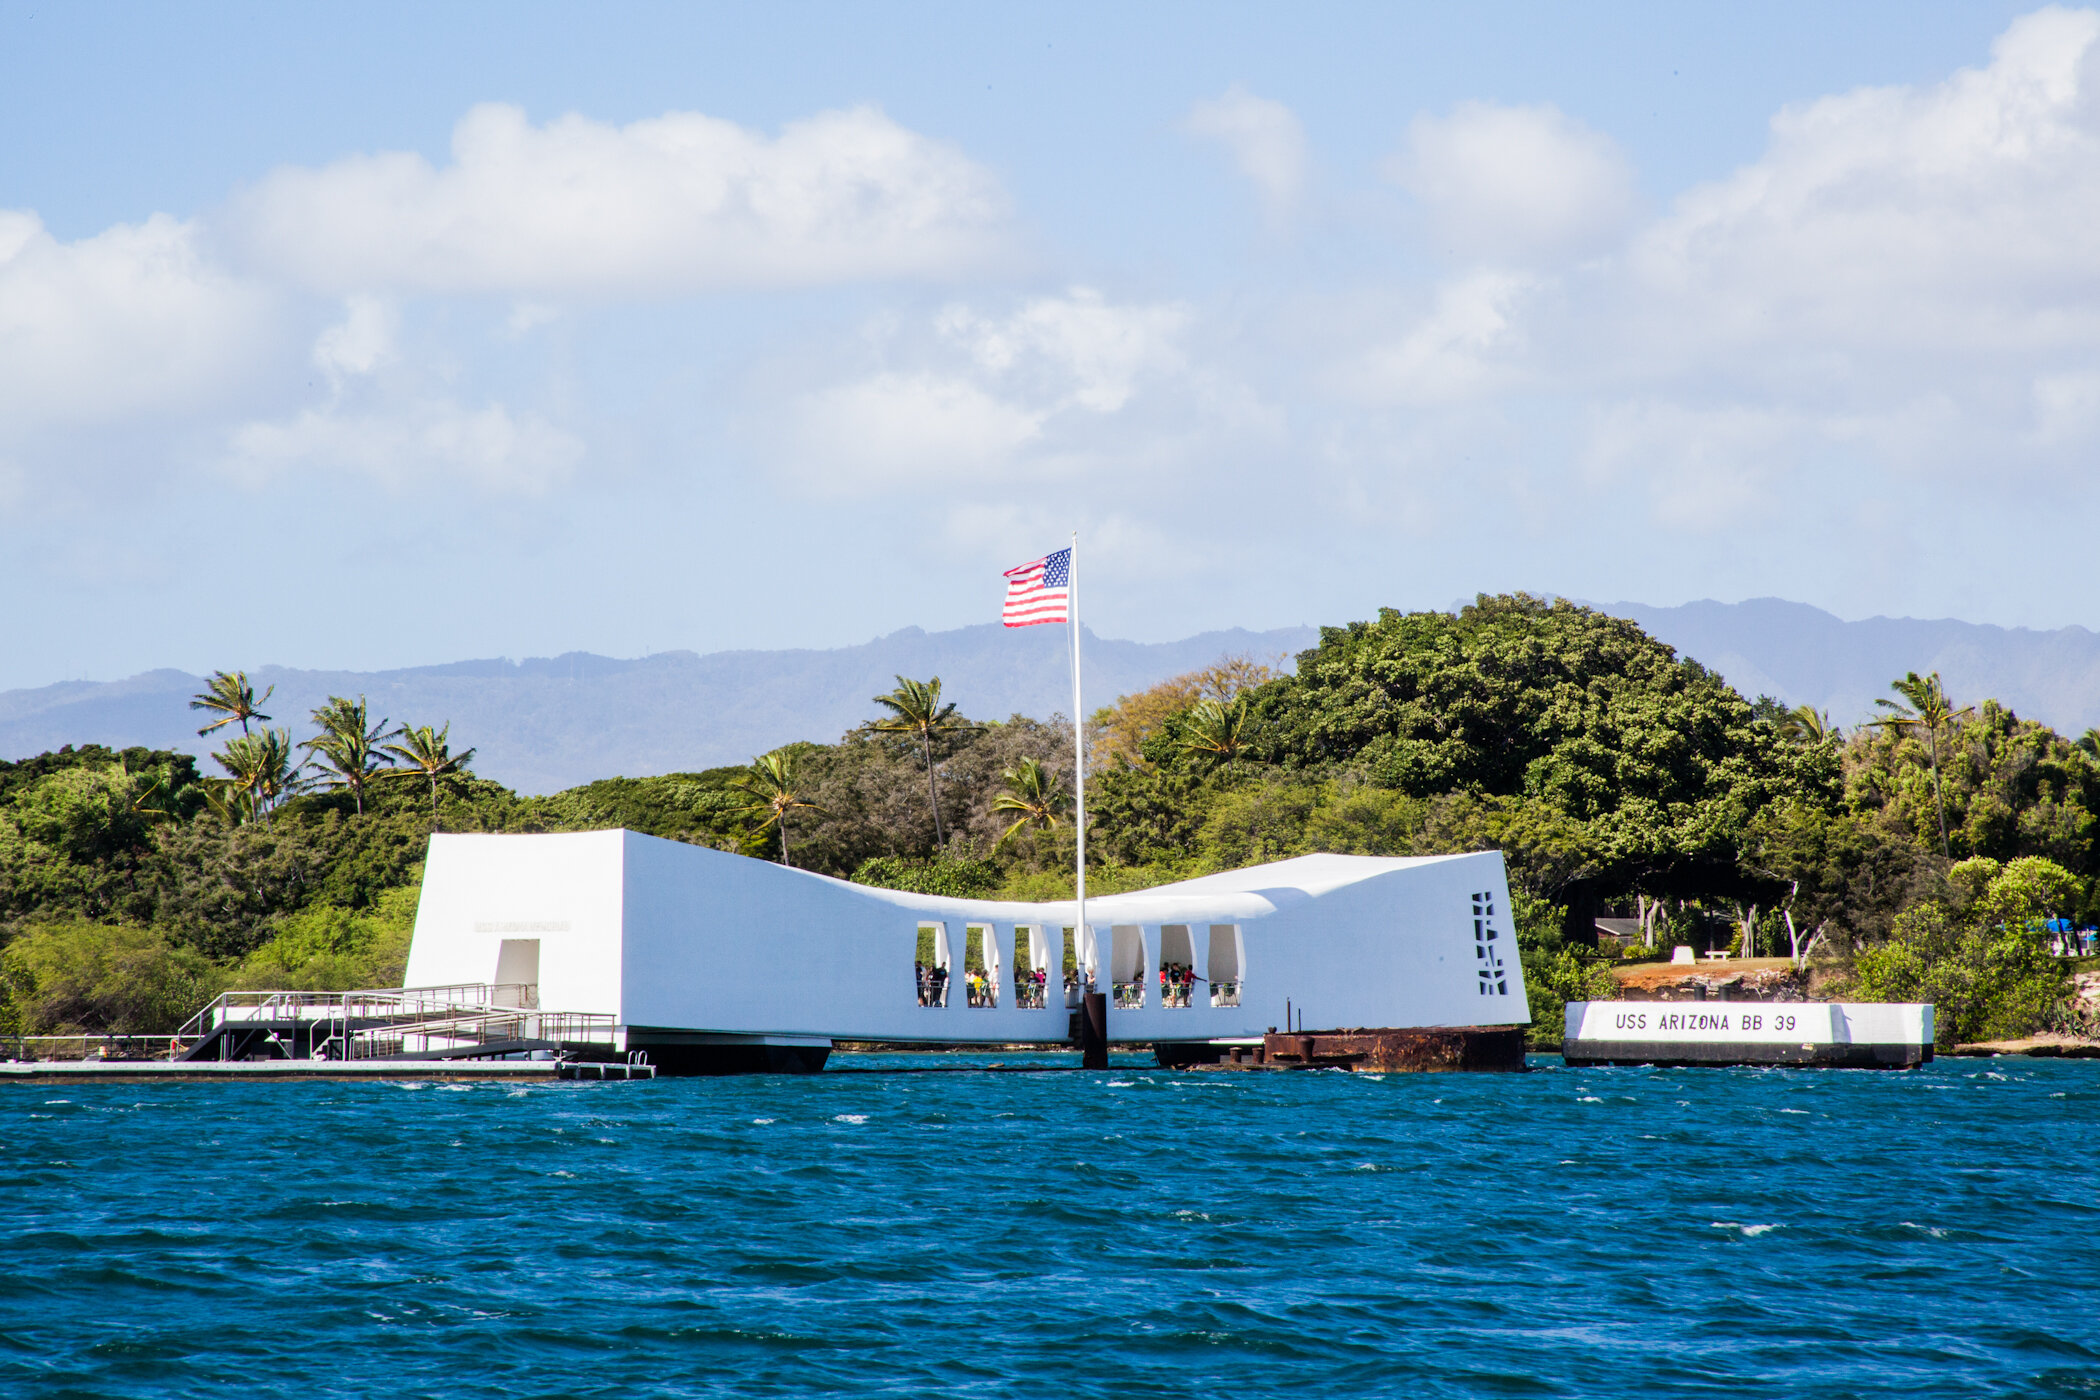 * Salute to Pearl Harbor by Waikiki Trolley 